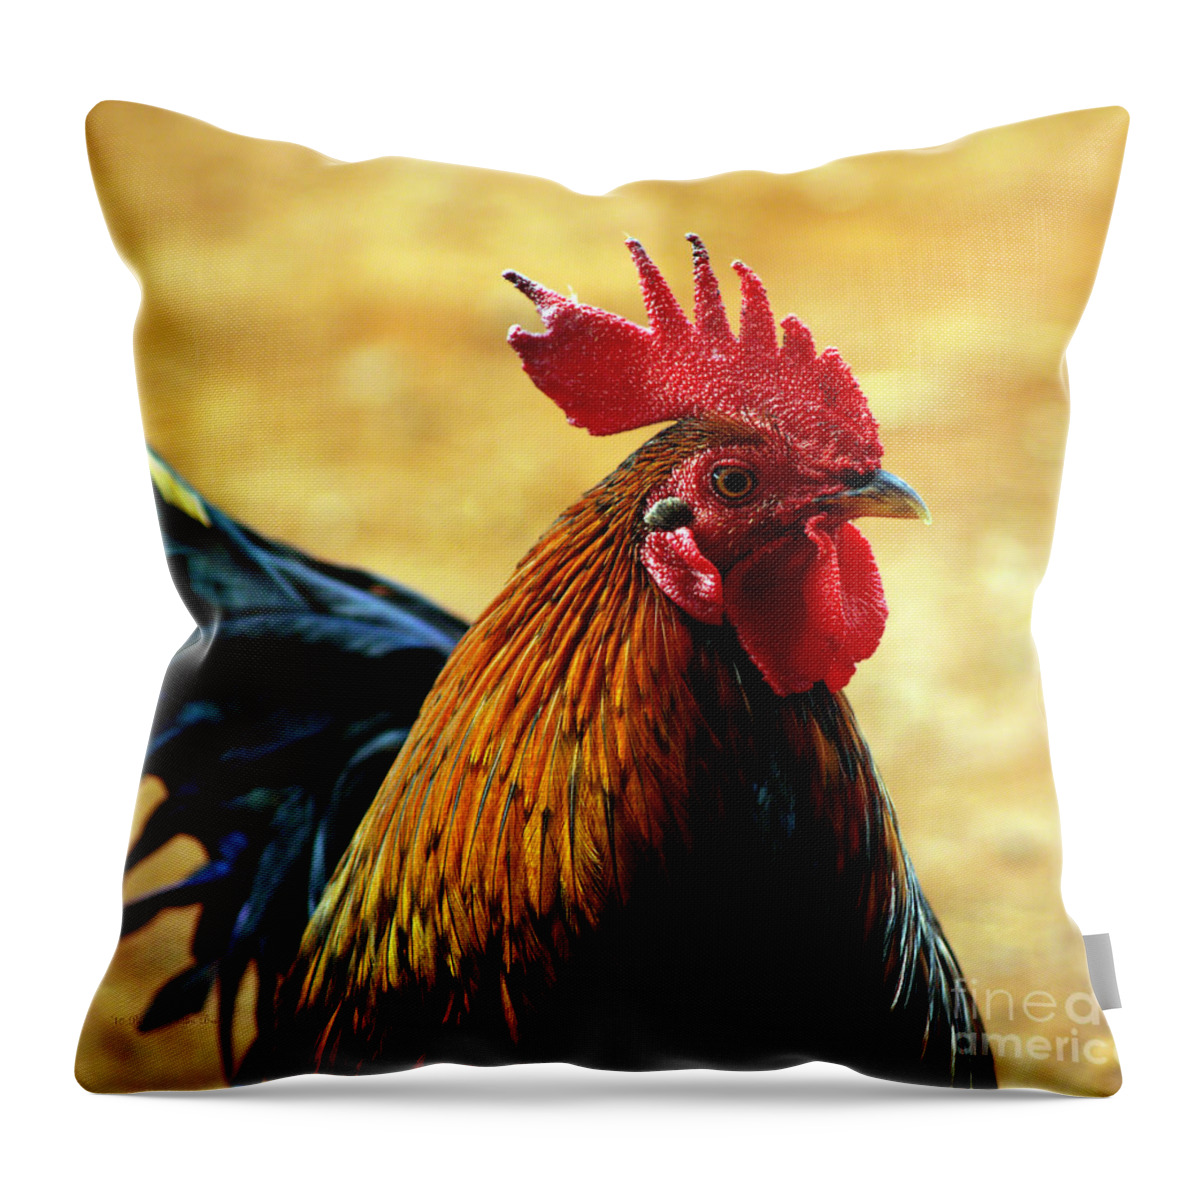 Fine Art Photography Throw Pillow featuring the photograph Foghorn I by Patricia Griffin Brett